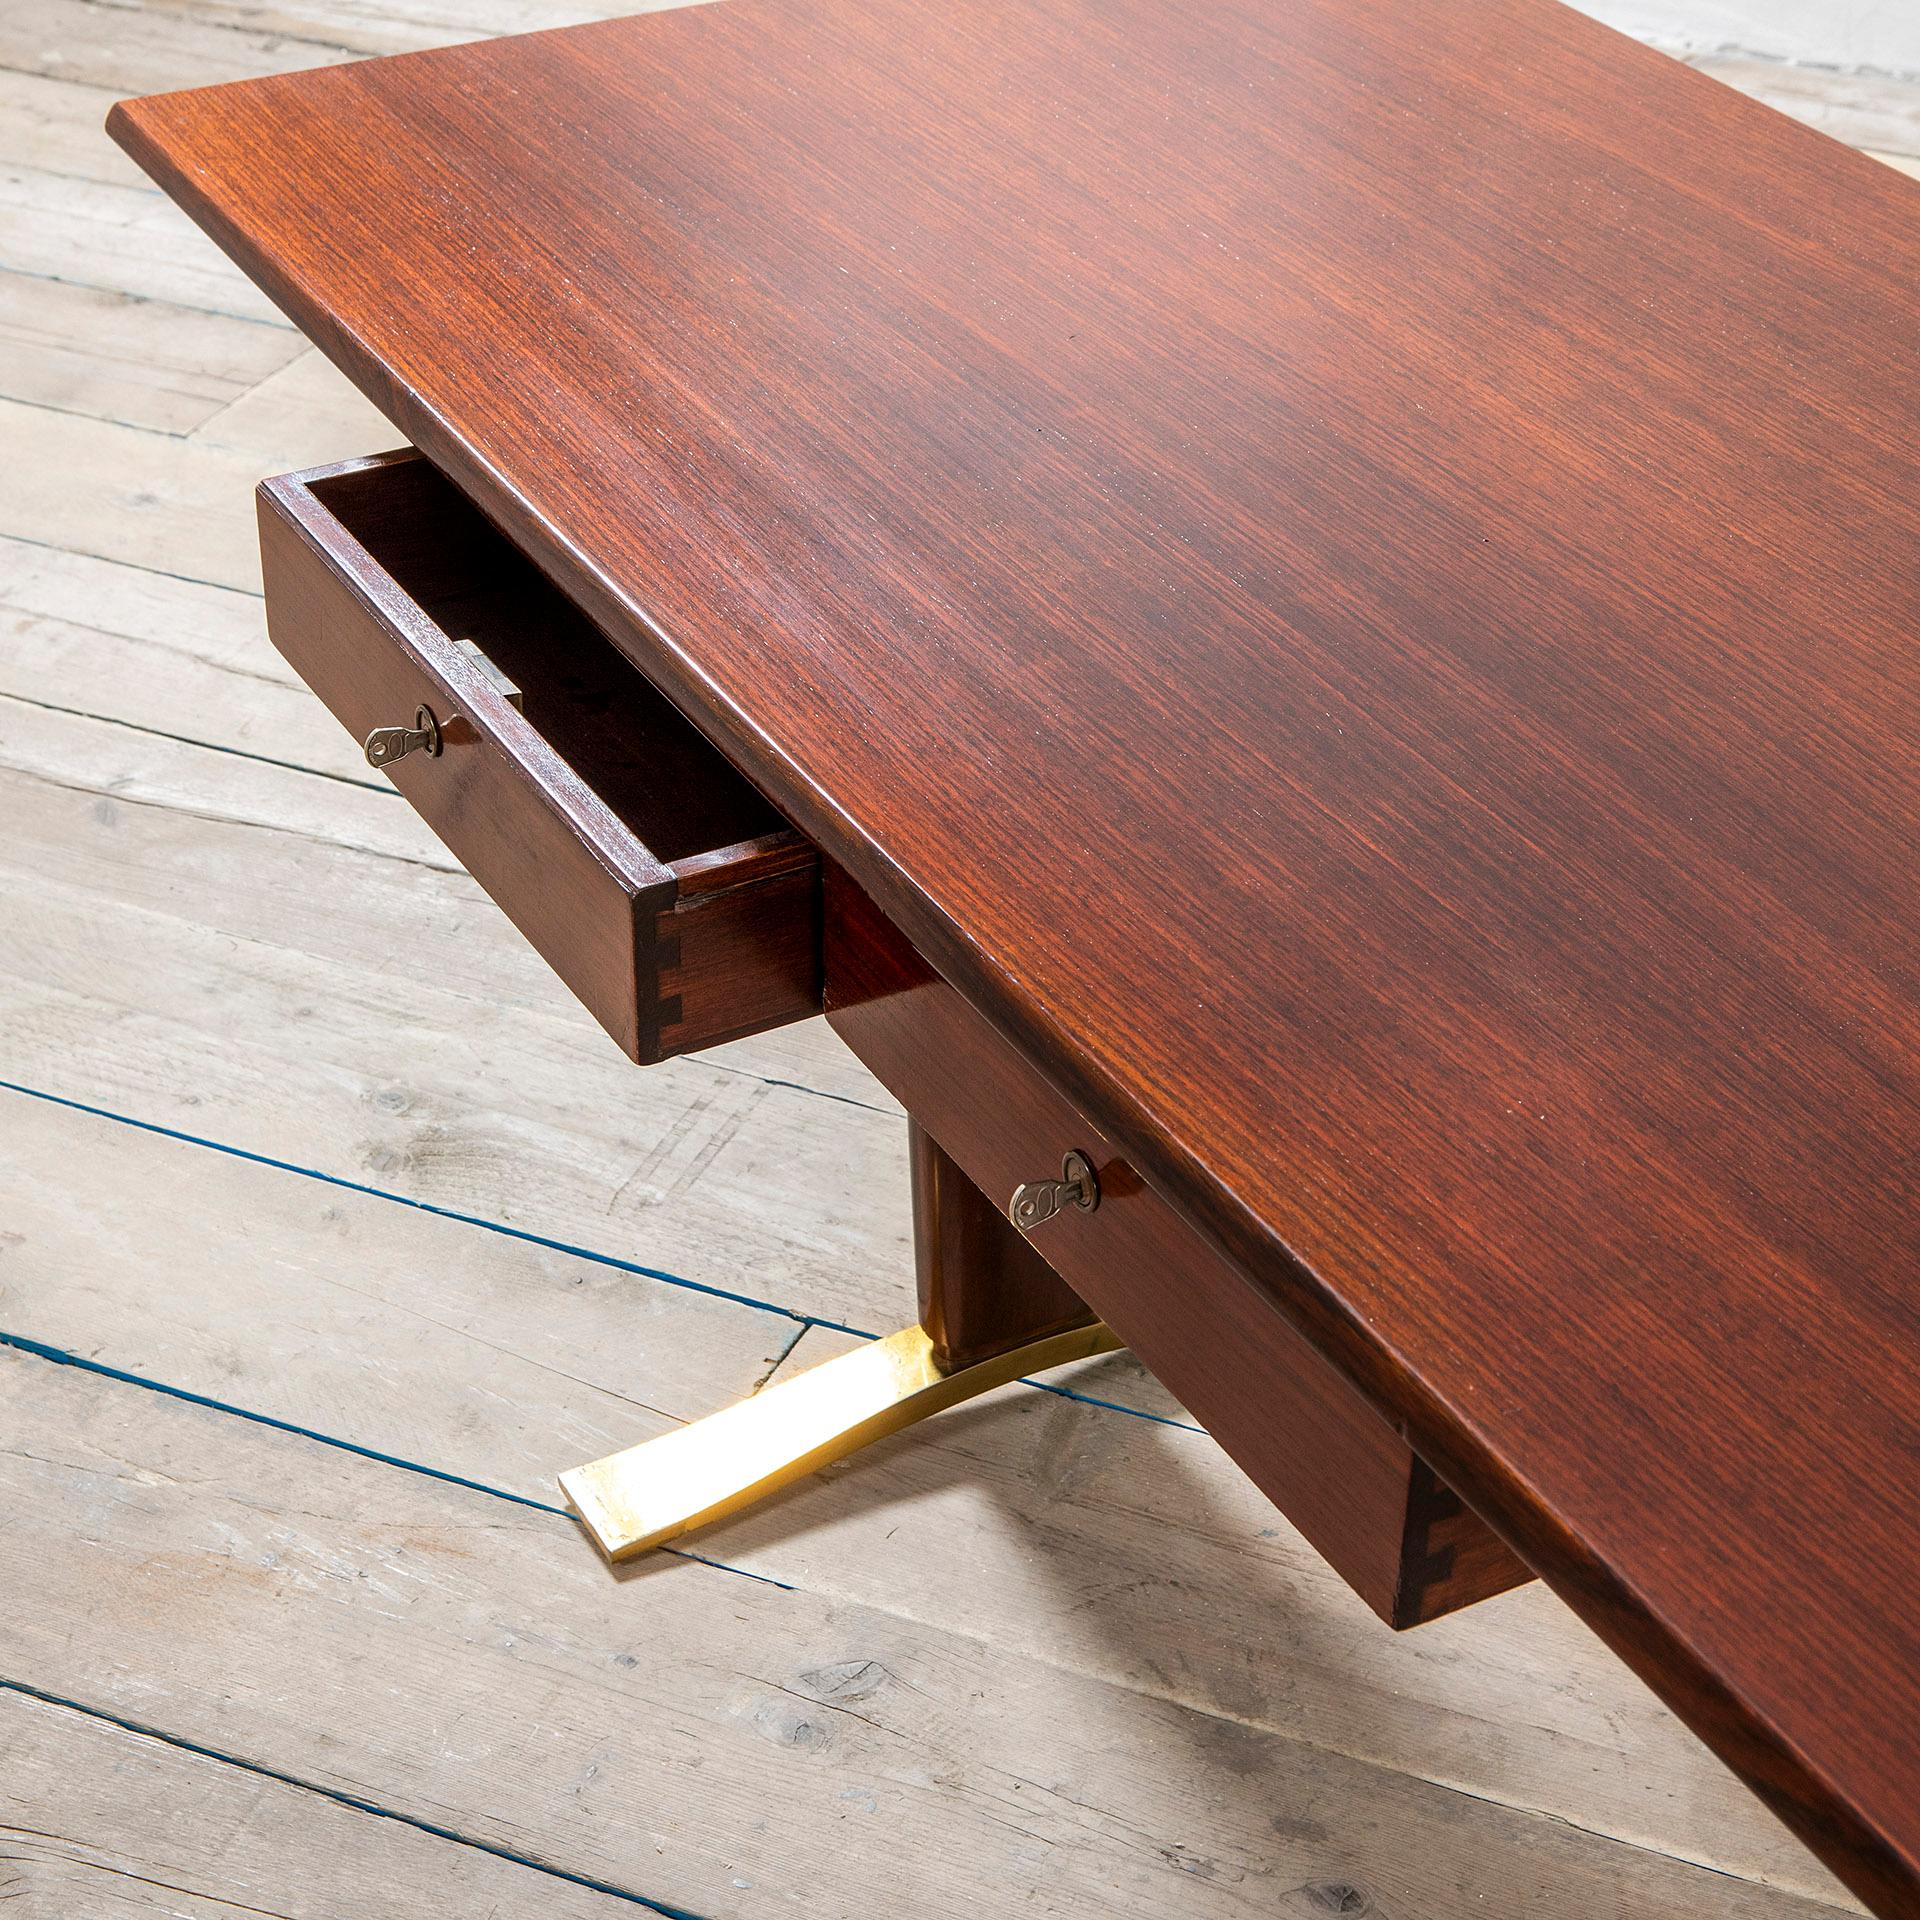 Desk designed by the italian Maestro Osvaldo Borsani in half sixties. The desk has a very modern line, the top is very thin and has two drawers that seems suspended, each drawer has its own original key. The table stands with two peculiar feet made